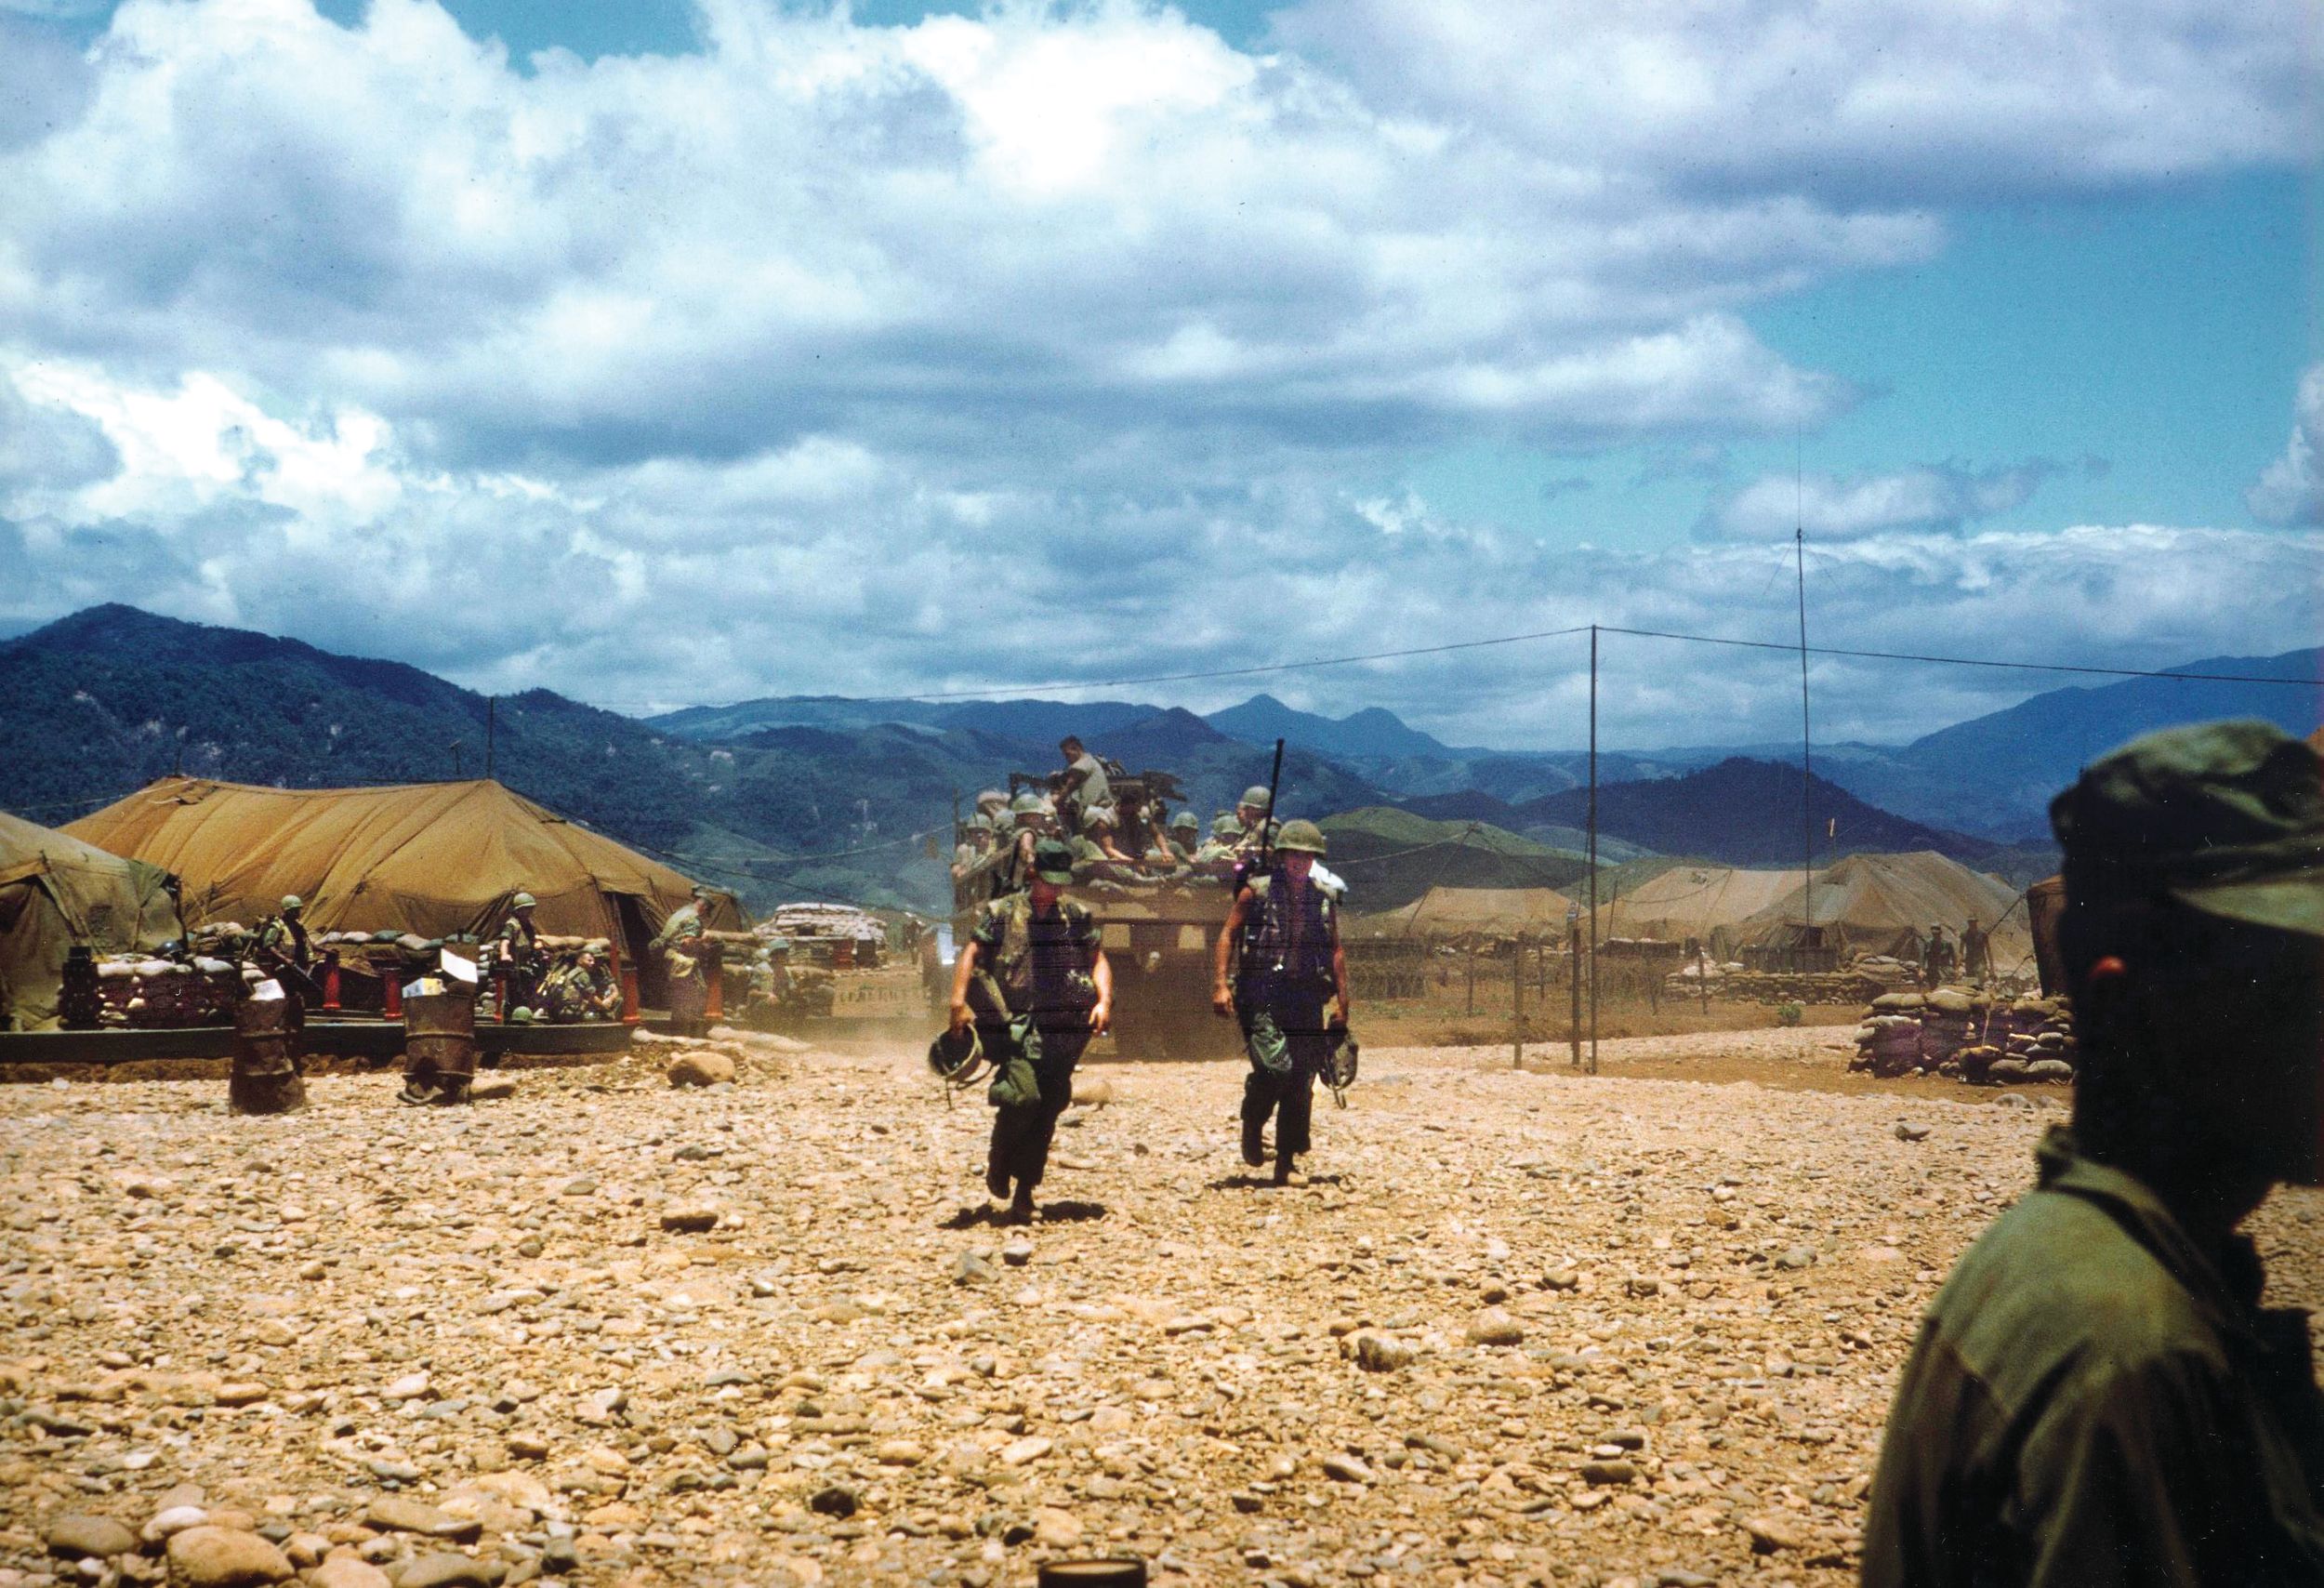 Elements of the 4th Marine Regiment arrive in Con Thien in April 1967 to furnish security for Marine engineers and Navy Seabees working on Defense Secretary McNamara’s 14-mile long defensive barrier between Con Thien and Gio Linh.